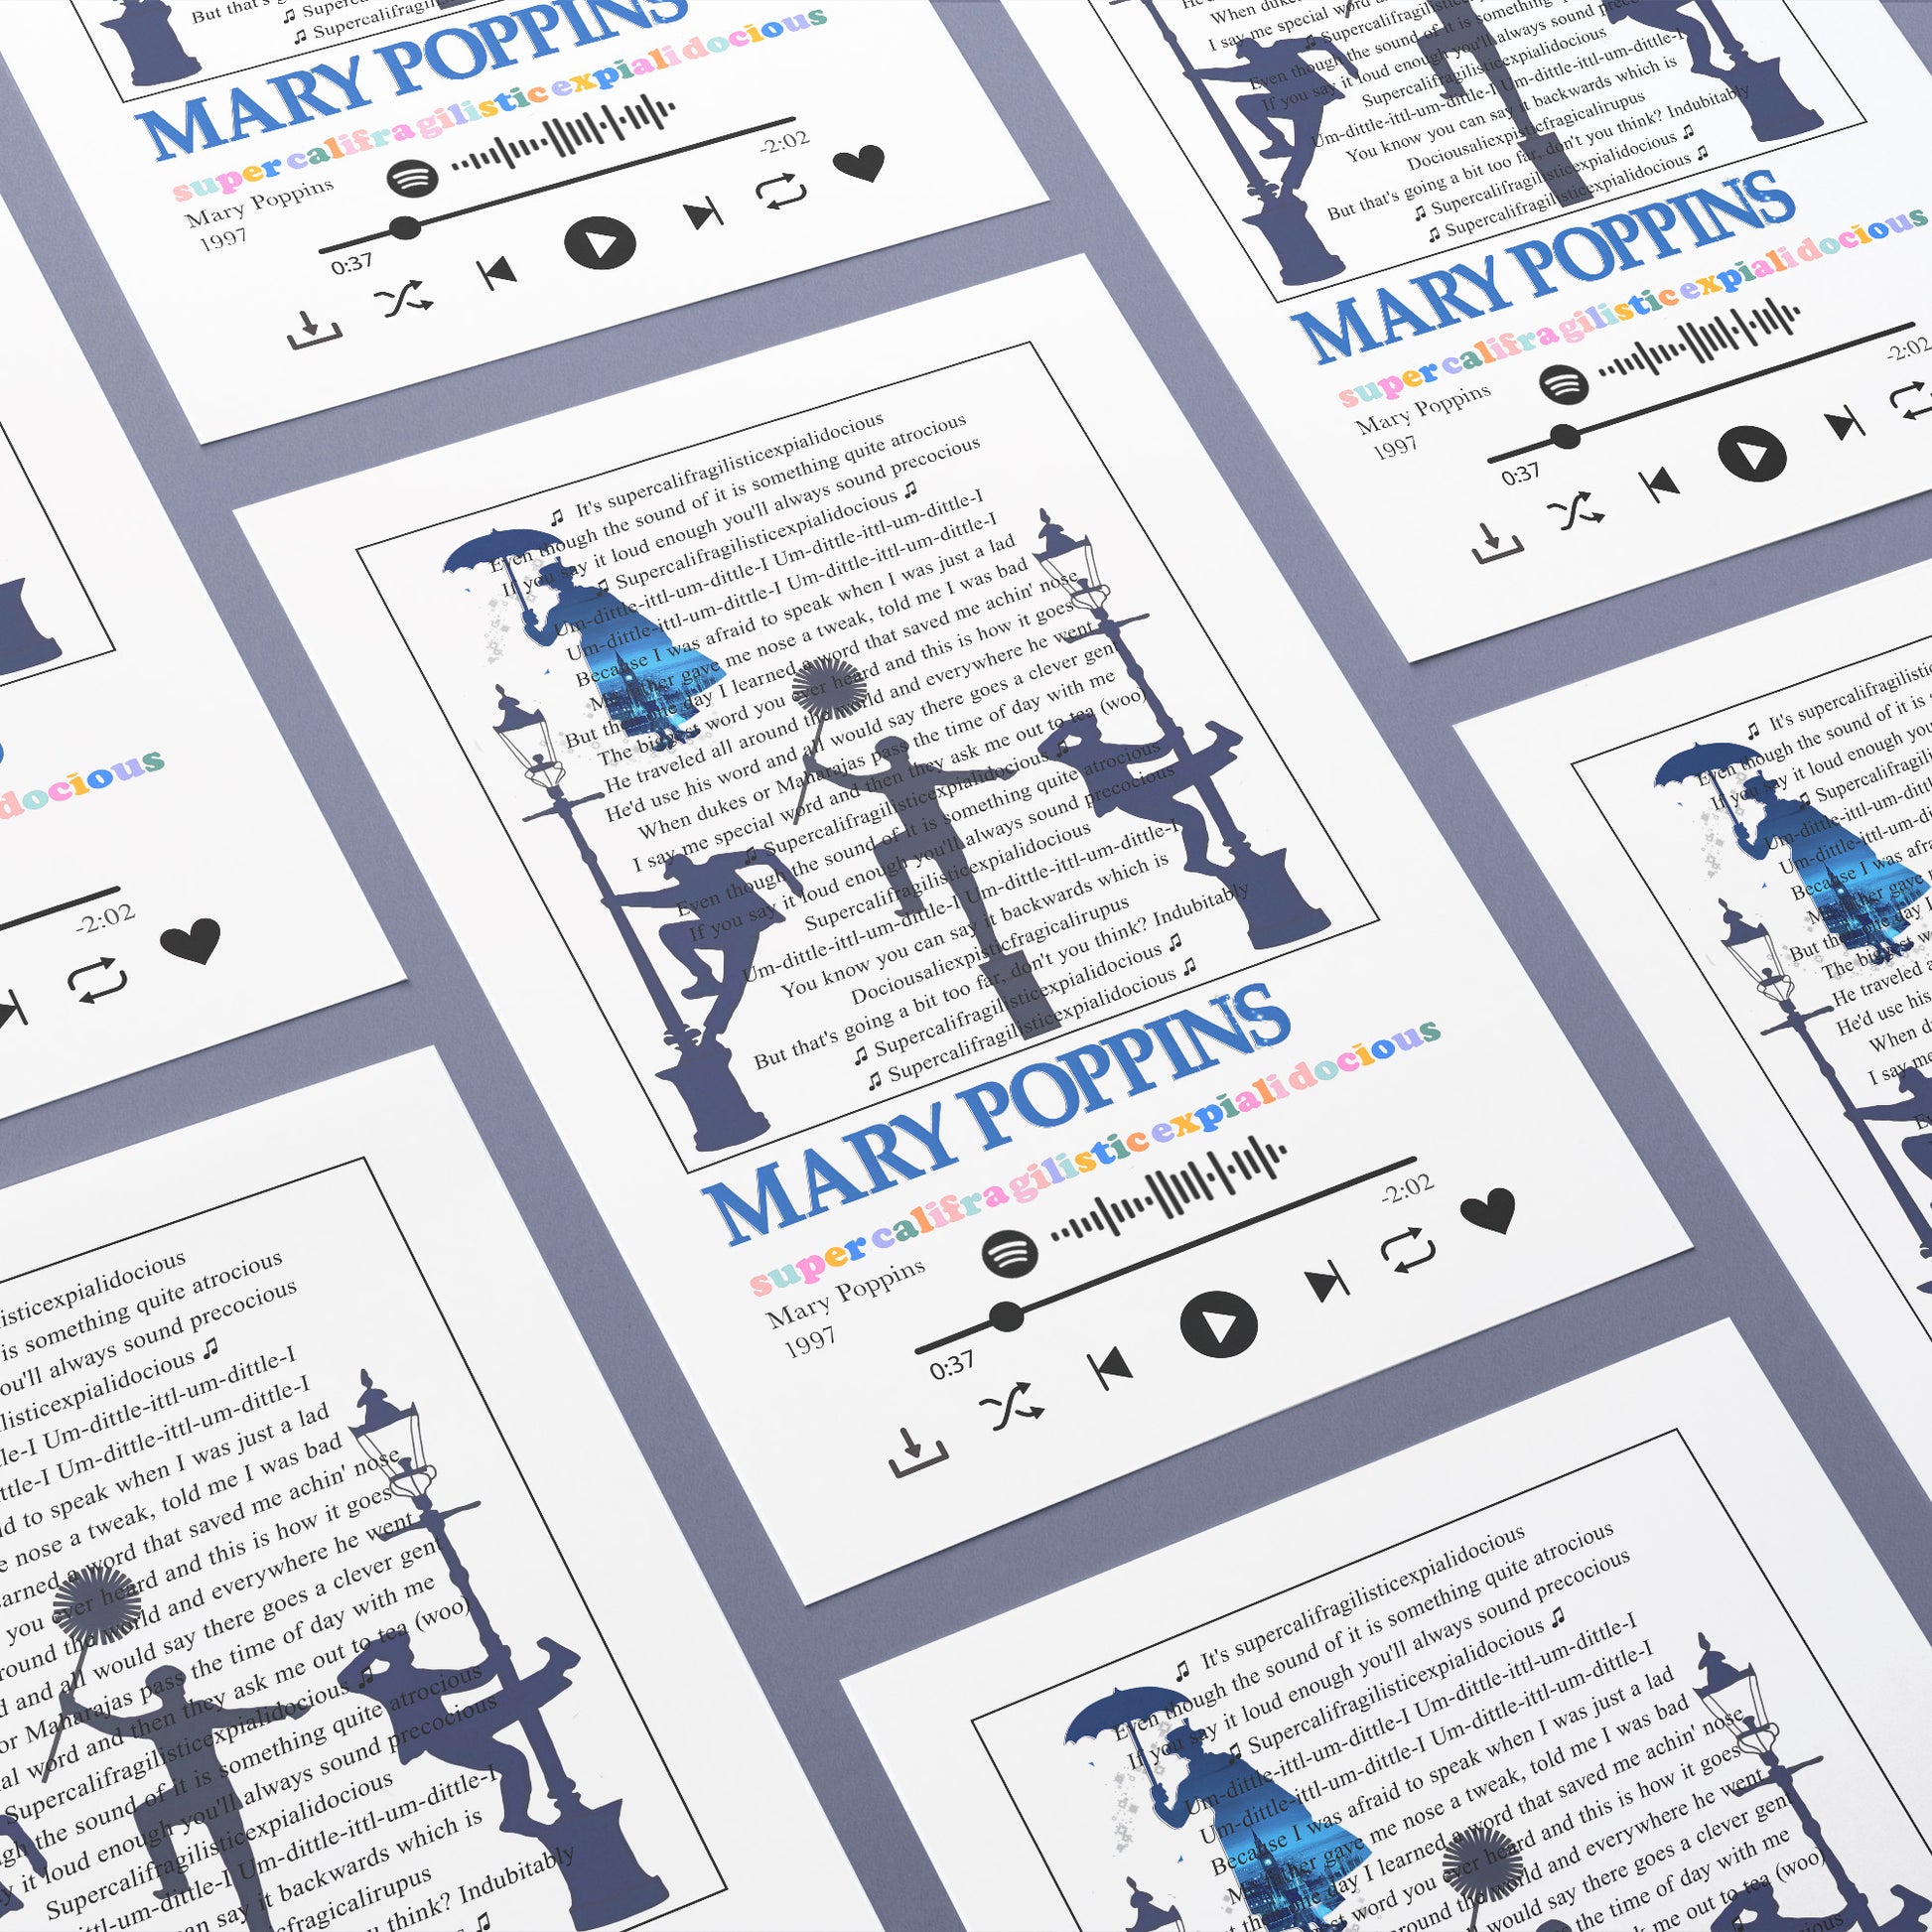 "Have a spoonful of fun with these amazing Mary Poppins - Supercalifragilisticexpialidocious Prints! From your favorite Spotify song to any song lyric of your choice, these prints let you express yourself in the most unique way! With 100s of unique designs, and the option to personalise lyrics, these colorful poster prints are an excellent way to add a bit of fun to your walls!"